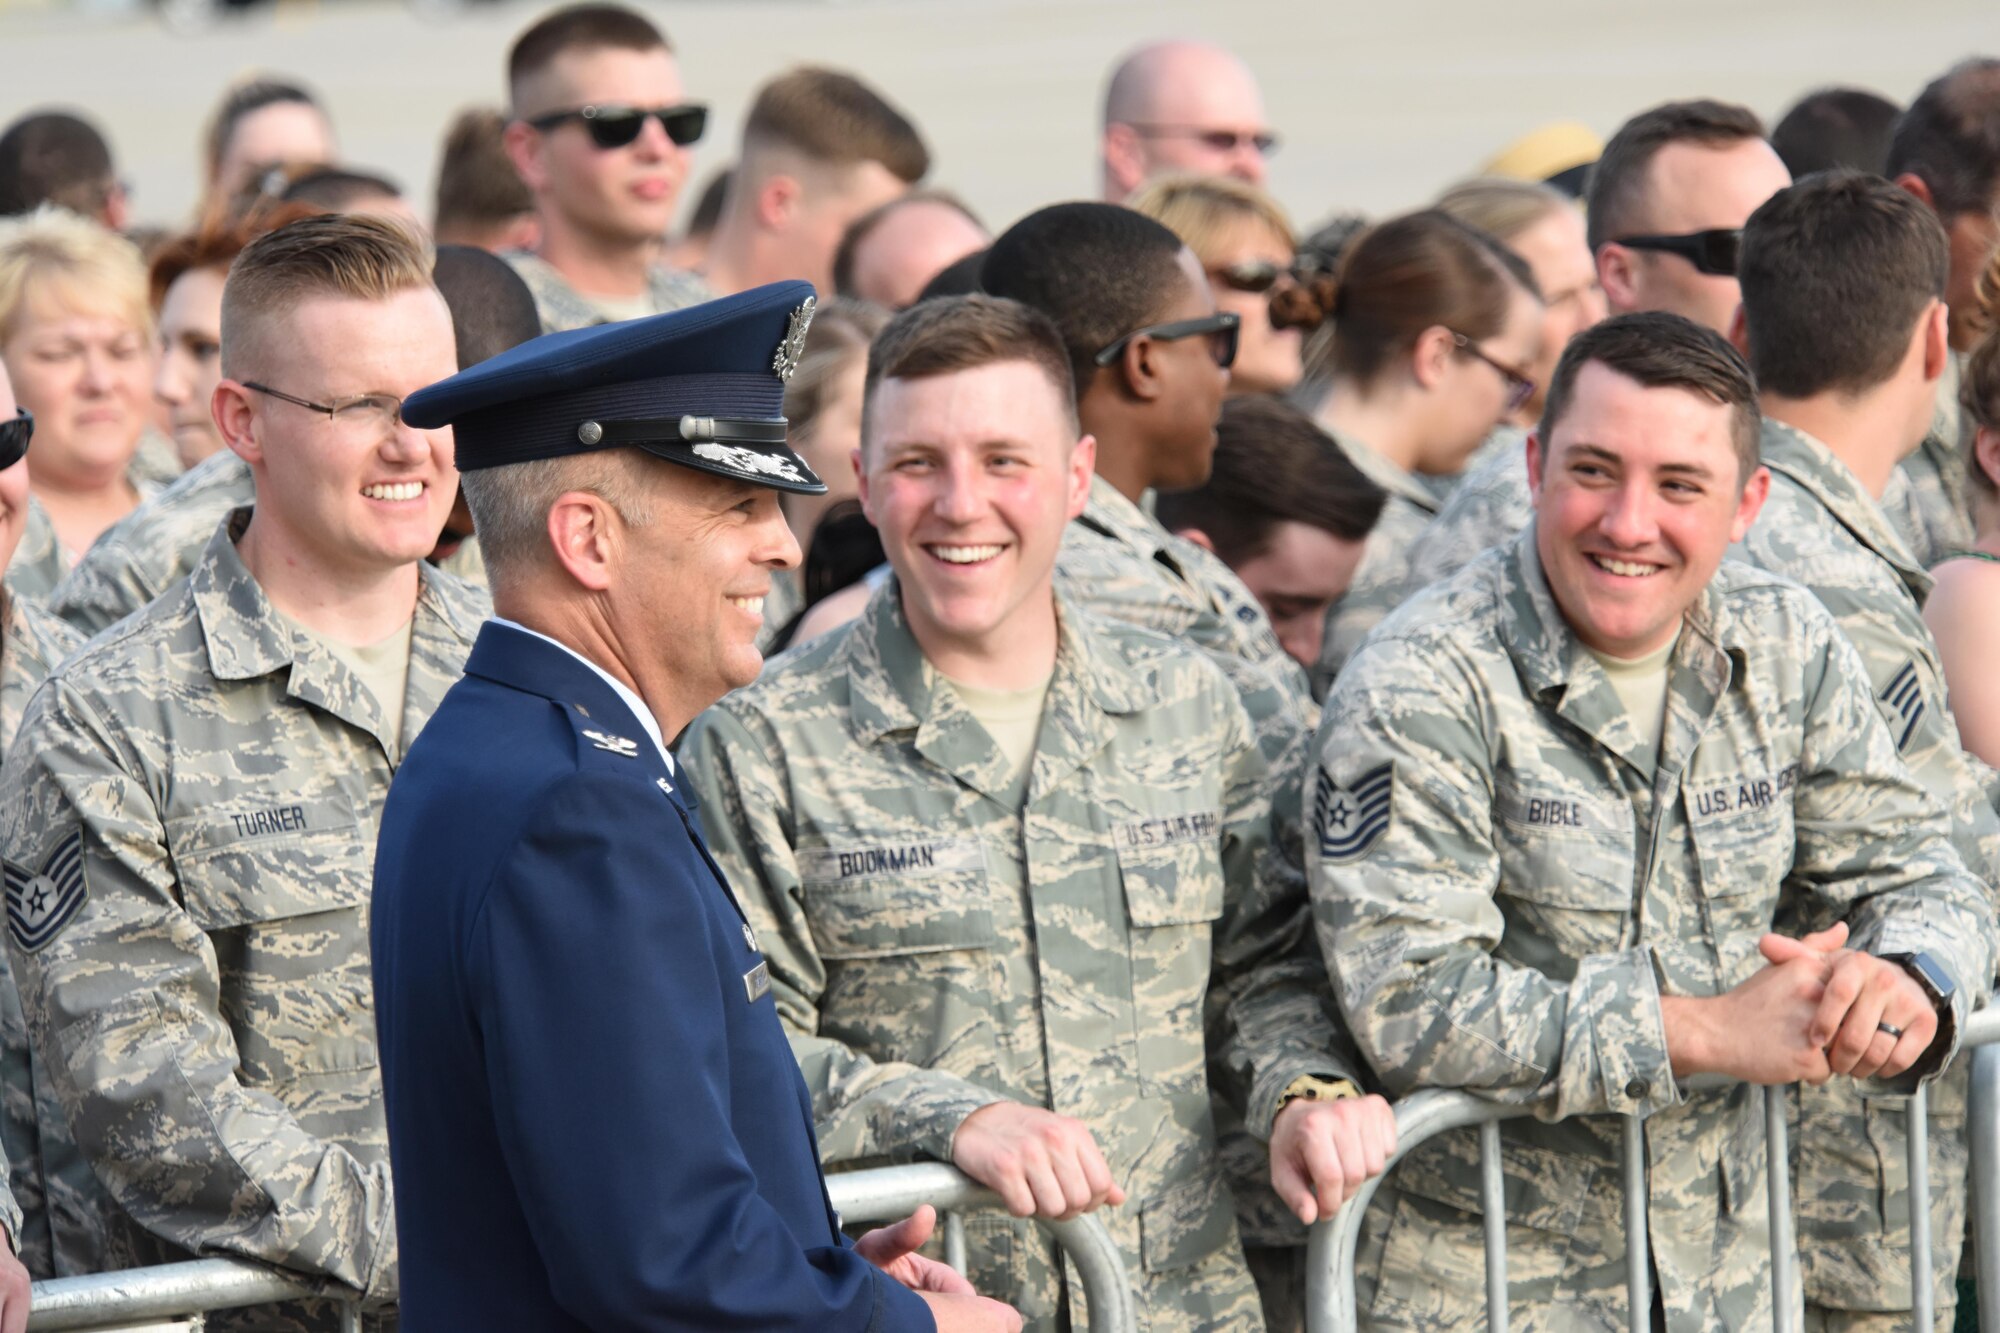 193rd Special Operation Wing Commander Benjamin “Mike” Cason and Airmen of the wing along with their family and friends, watch the arrival of their commander-in-chief, President Donald J. Trump, Middletown, Pennsylvania, April 29, 2017. The president and Vice President Mike Pence landed at the 193rd SOW and took time to shake the hands of Airmen, along with Airmen’s family and friends before departing for the Harrisburg Farm Show Complex for President Trump’s 100th day rally. (U.S. Air National Guard Photo by Master Sgt. Culeen Shaffer/Released)